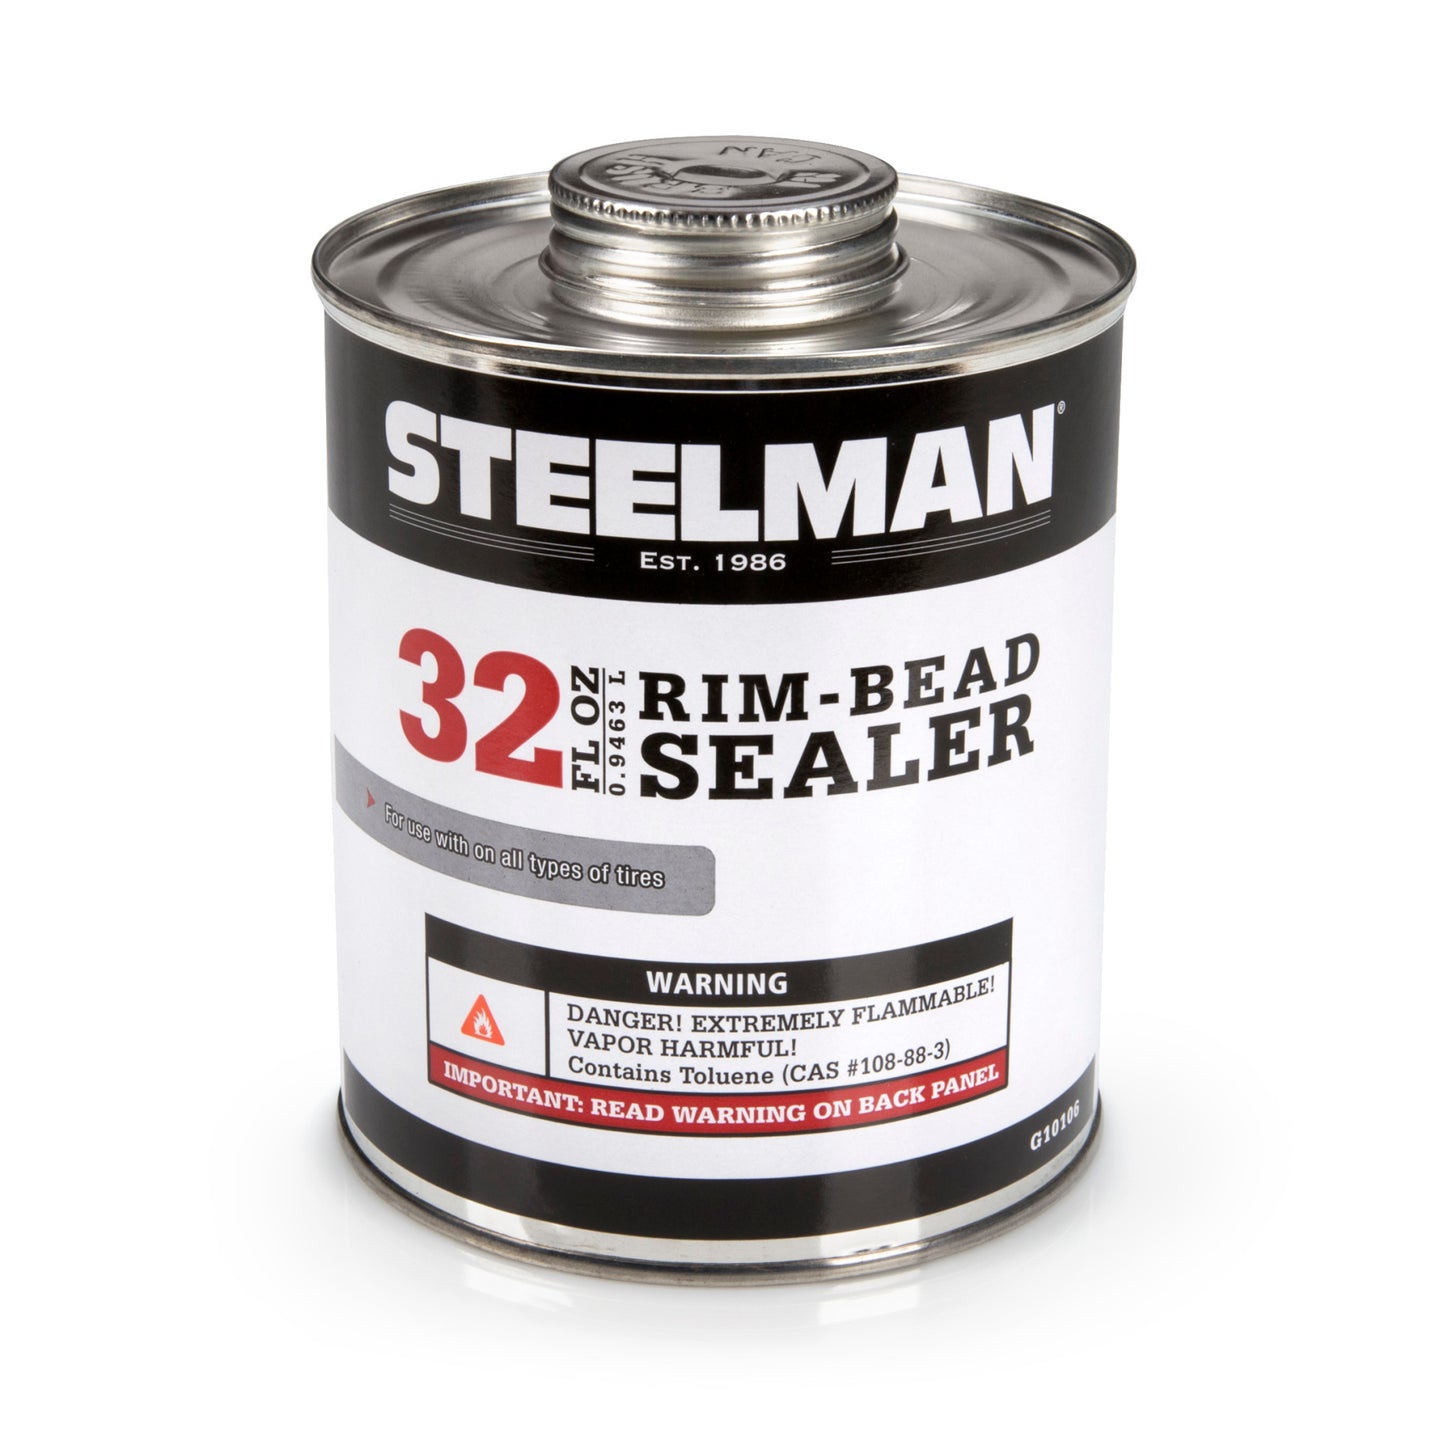 STEELMAN Tire Rim Bead Sealer is the perfect solution for repairing tubeless tires with leaks around the rim. Create a layer of rubber sealant between the tire and the wheel rim that acts as a patch.